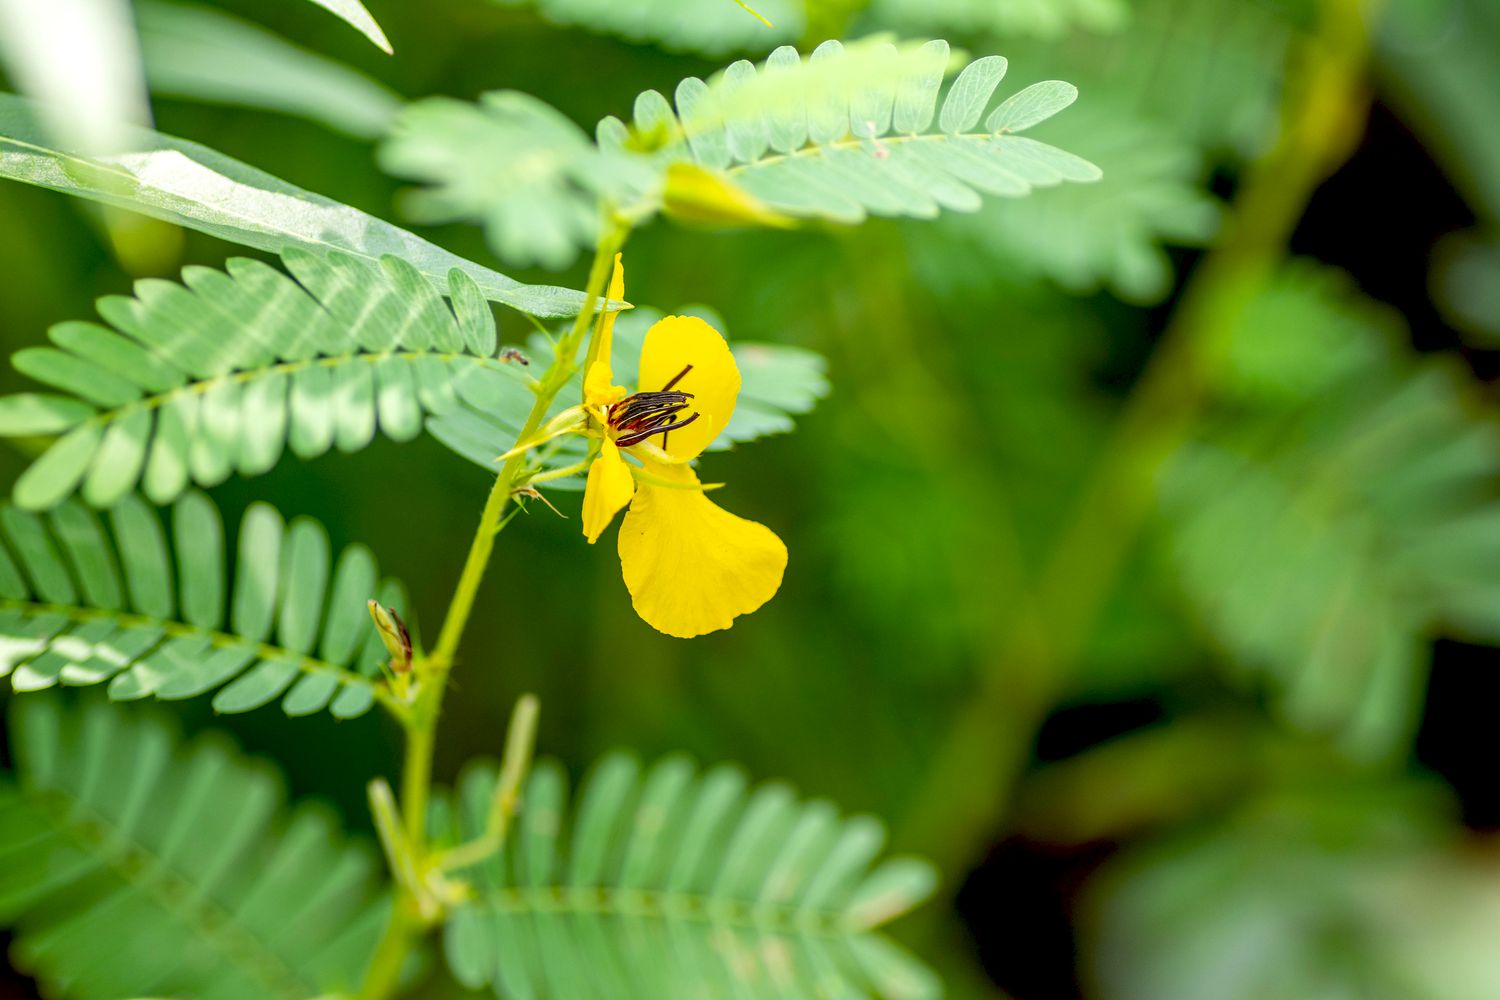 Partridge pea plant with yellow flower surrounded by feathery leaves closeup